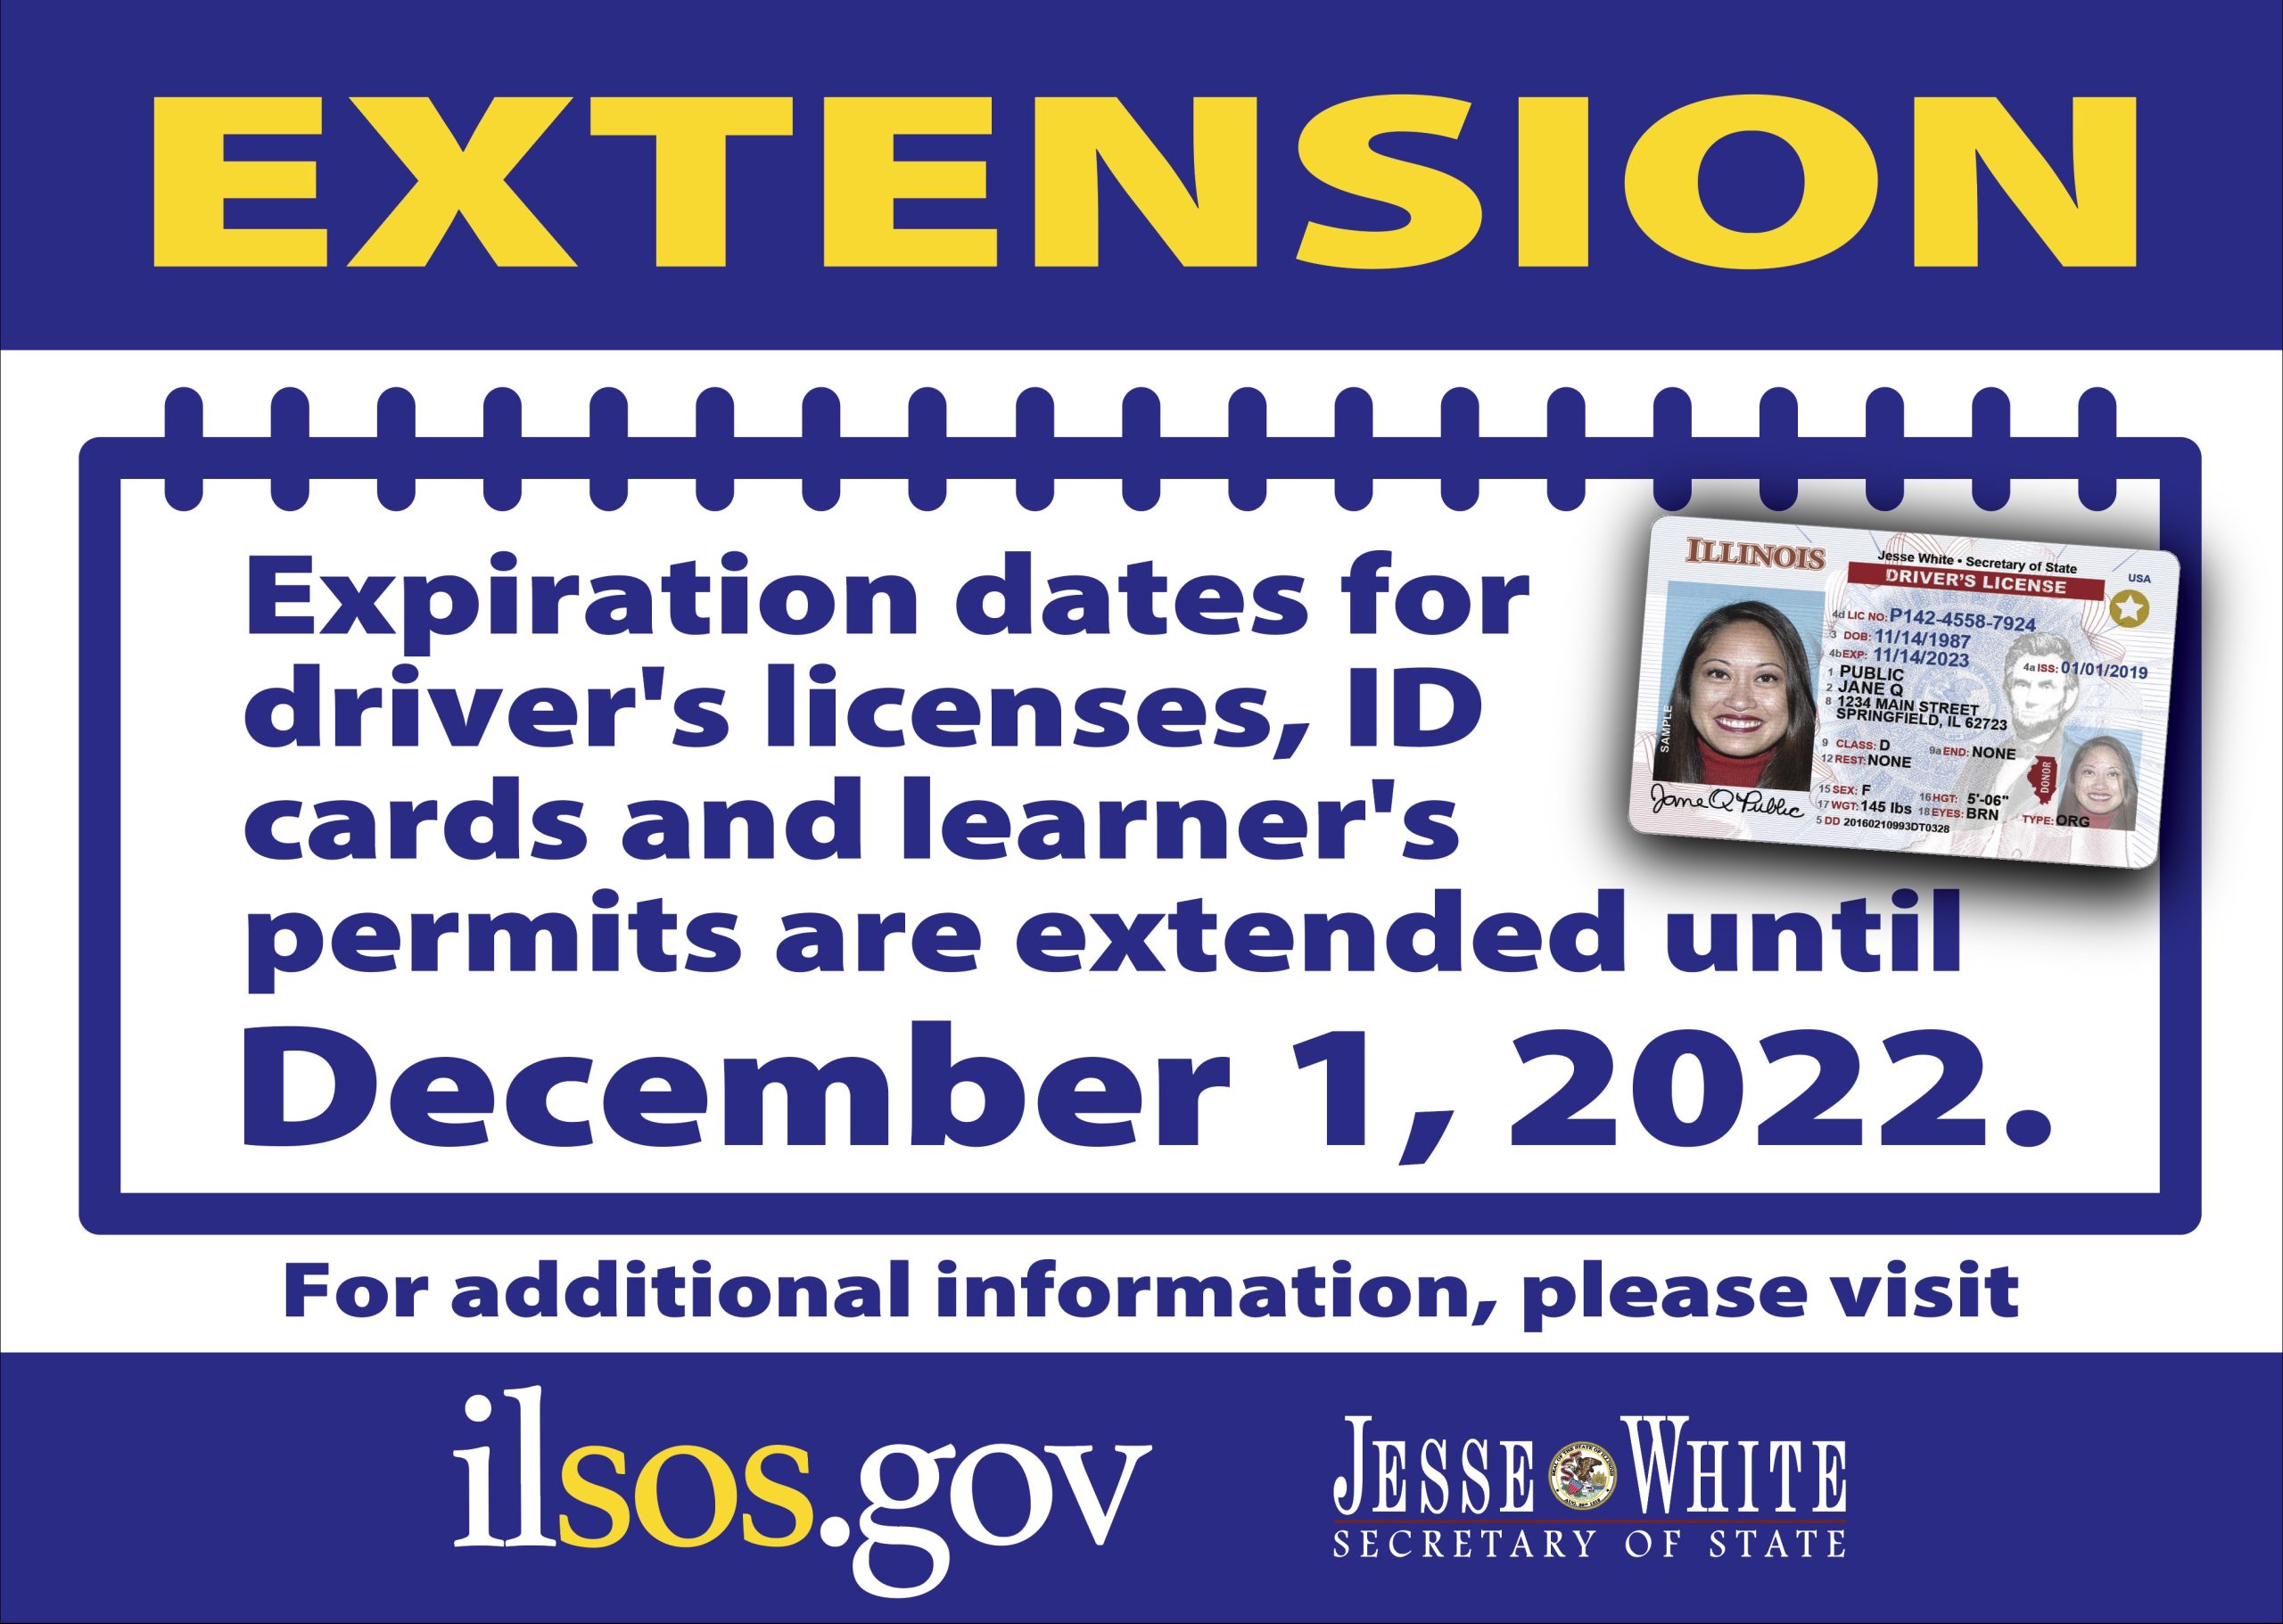 Jesse White Extending Drivers License and ID Card Expiration Dates until December 1, 2022 photo